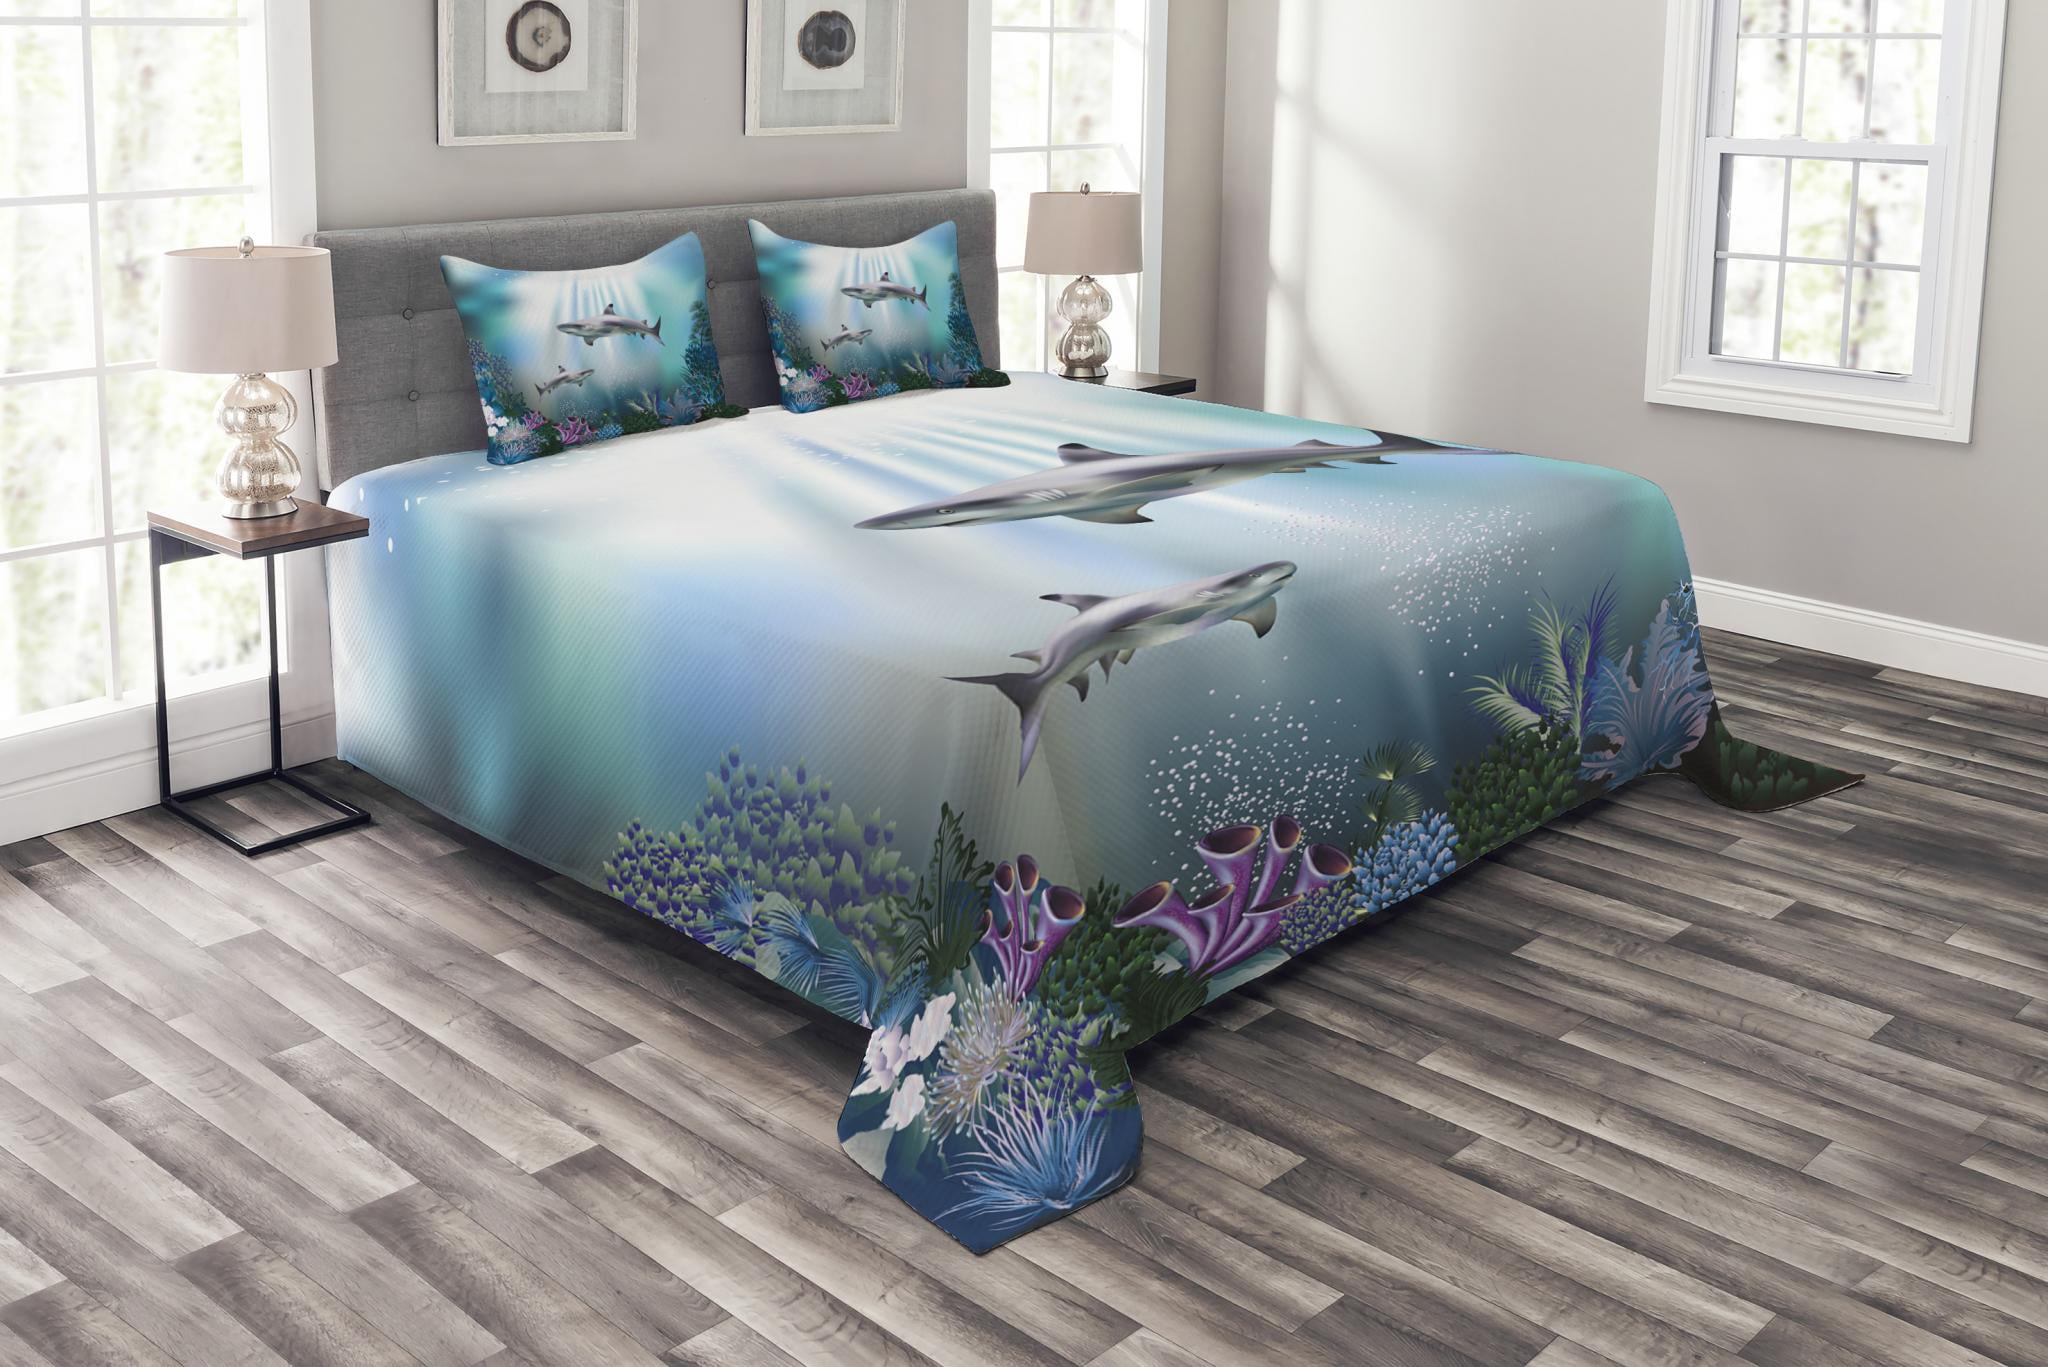 Underwater Bedspread Set King Size, Realistic Illustration Wild Sharks and  Plants Corals Seaweed Aquatic Ocean Life, Quilted 3 Piece Decor Coverlet  Set with 2 Pillow Shams, Multicolor, by Ambesonne - Walmart.com